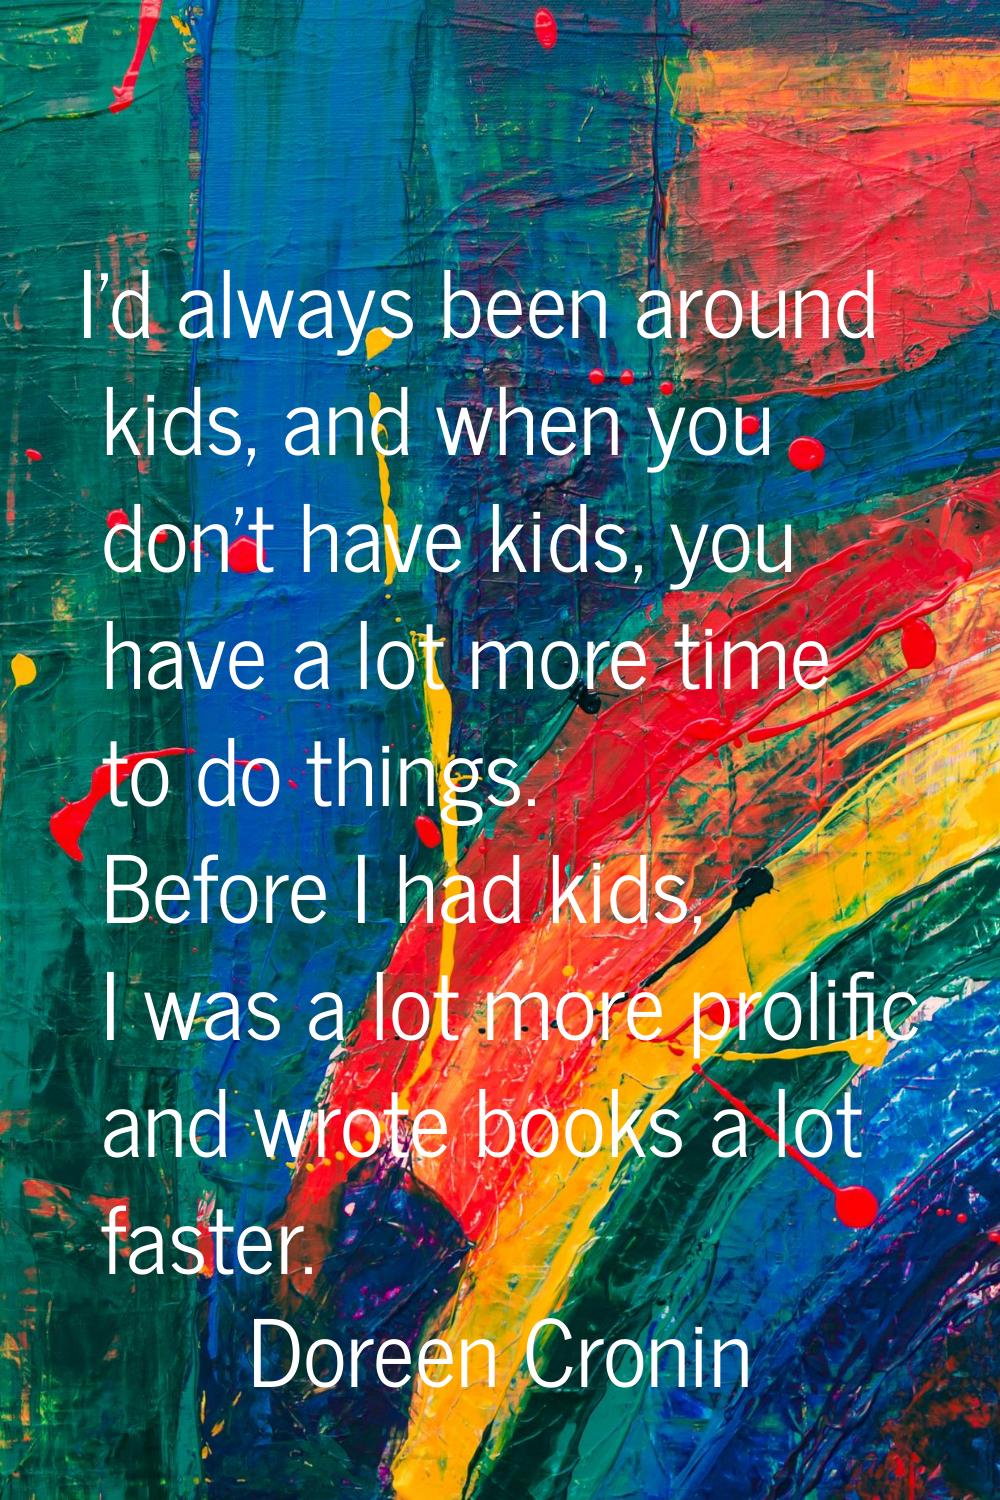 I'd always been around kids, and when you don't have kids, you have a lot more time to do things. B